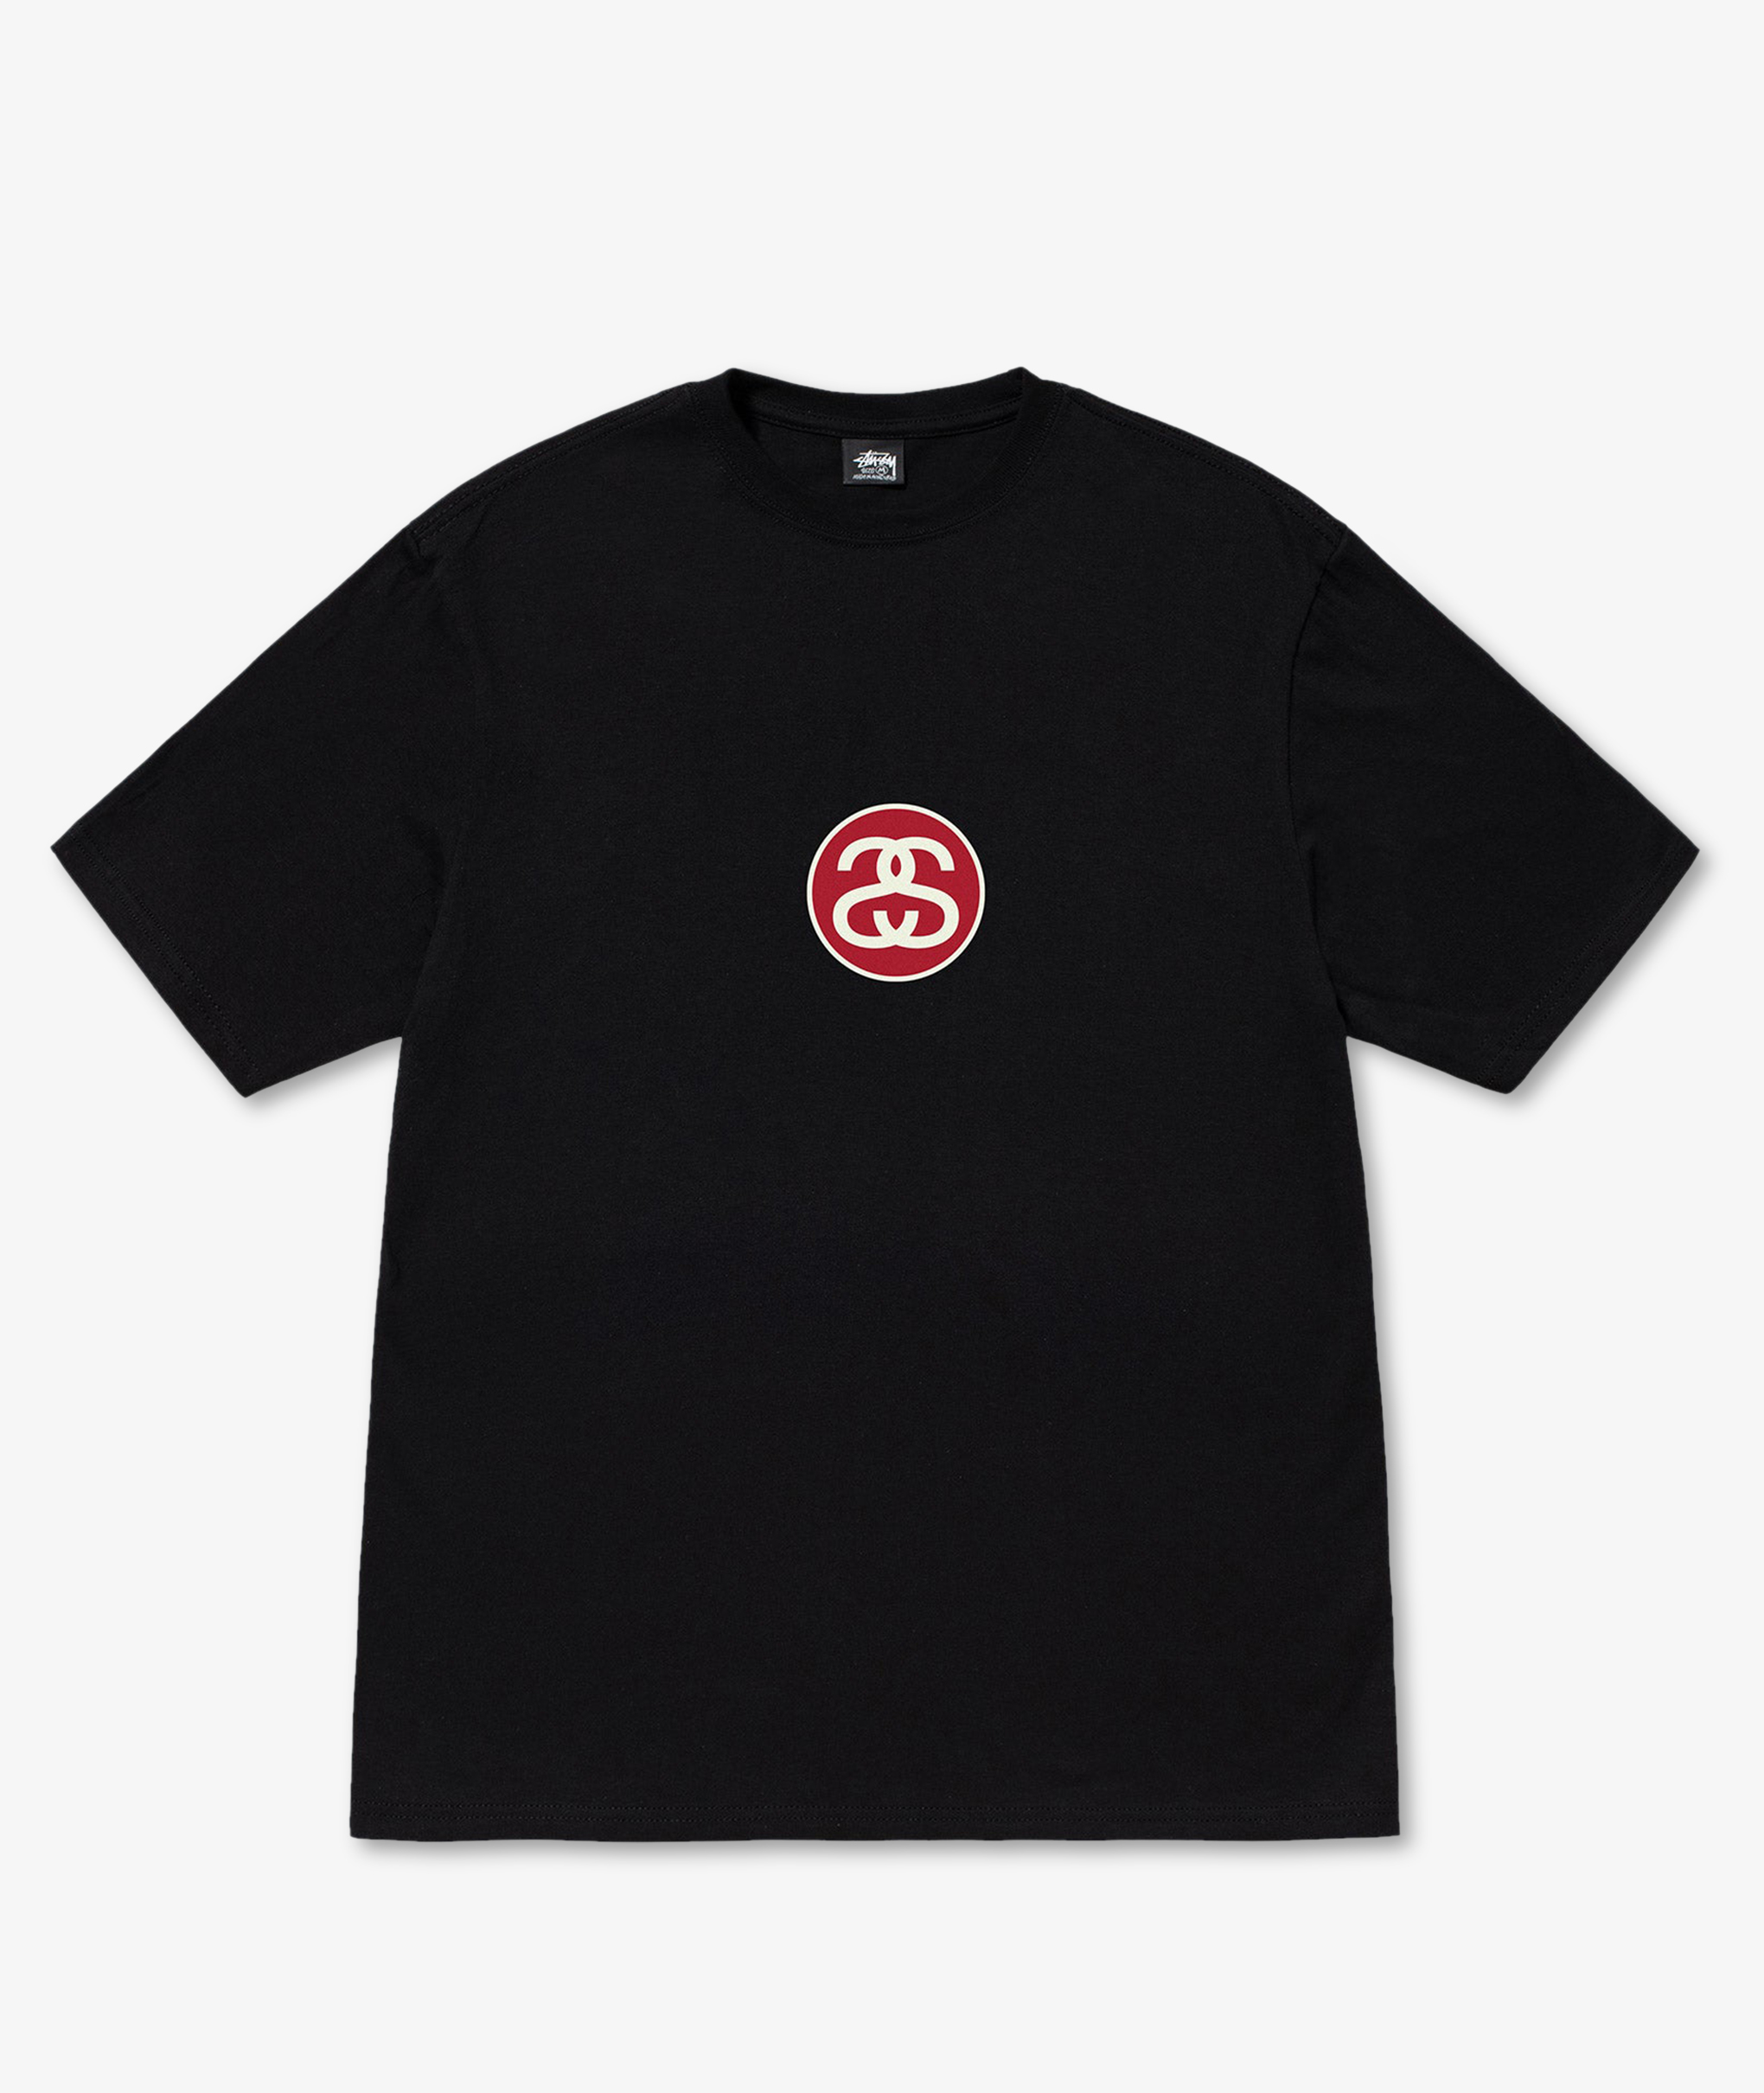 Norse Store | Shipping Worldwide - Stüssy SS-Link Tee - Black